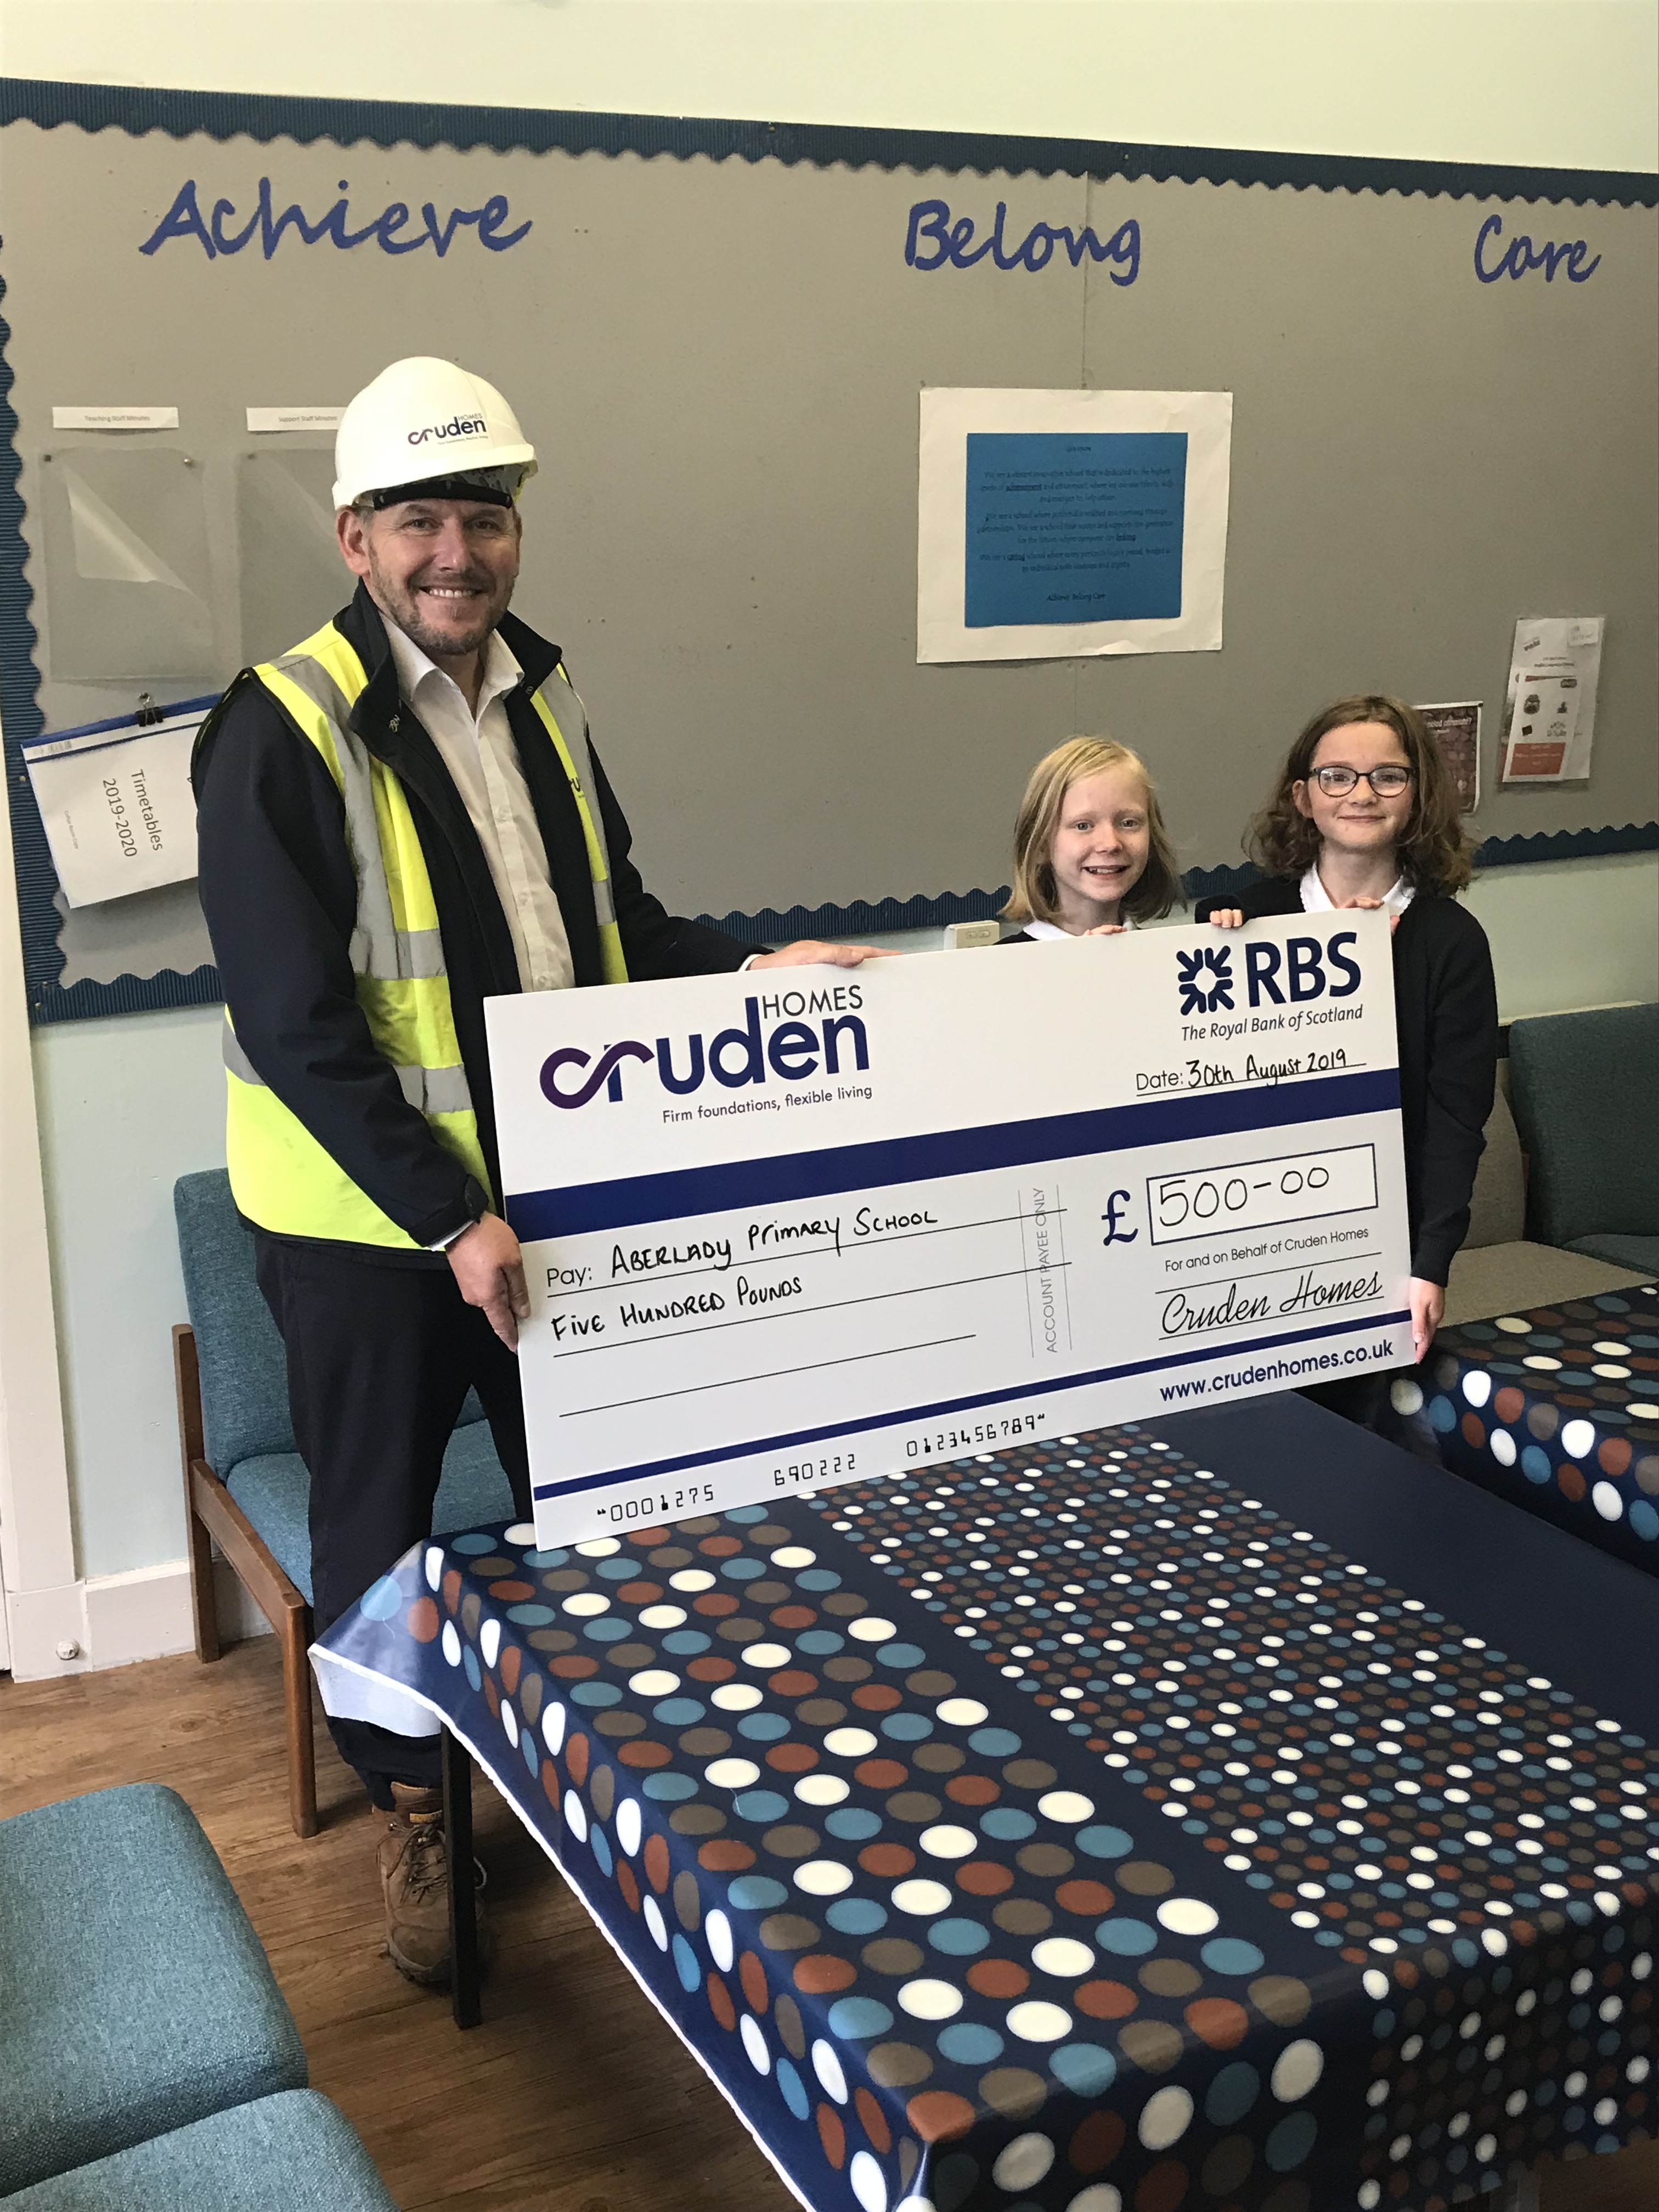 Andy Brown, Contracts Manager for Meadowside, Aberlady, presenting the cheque to two pupils at Aberlady Primary school